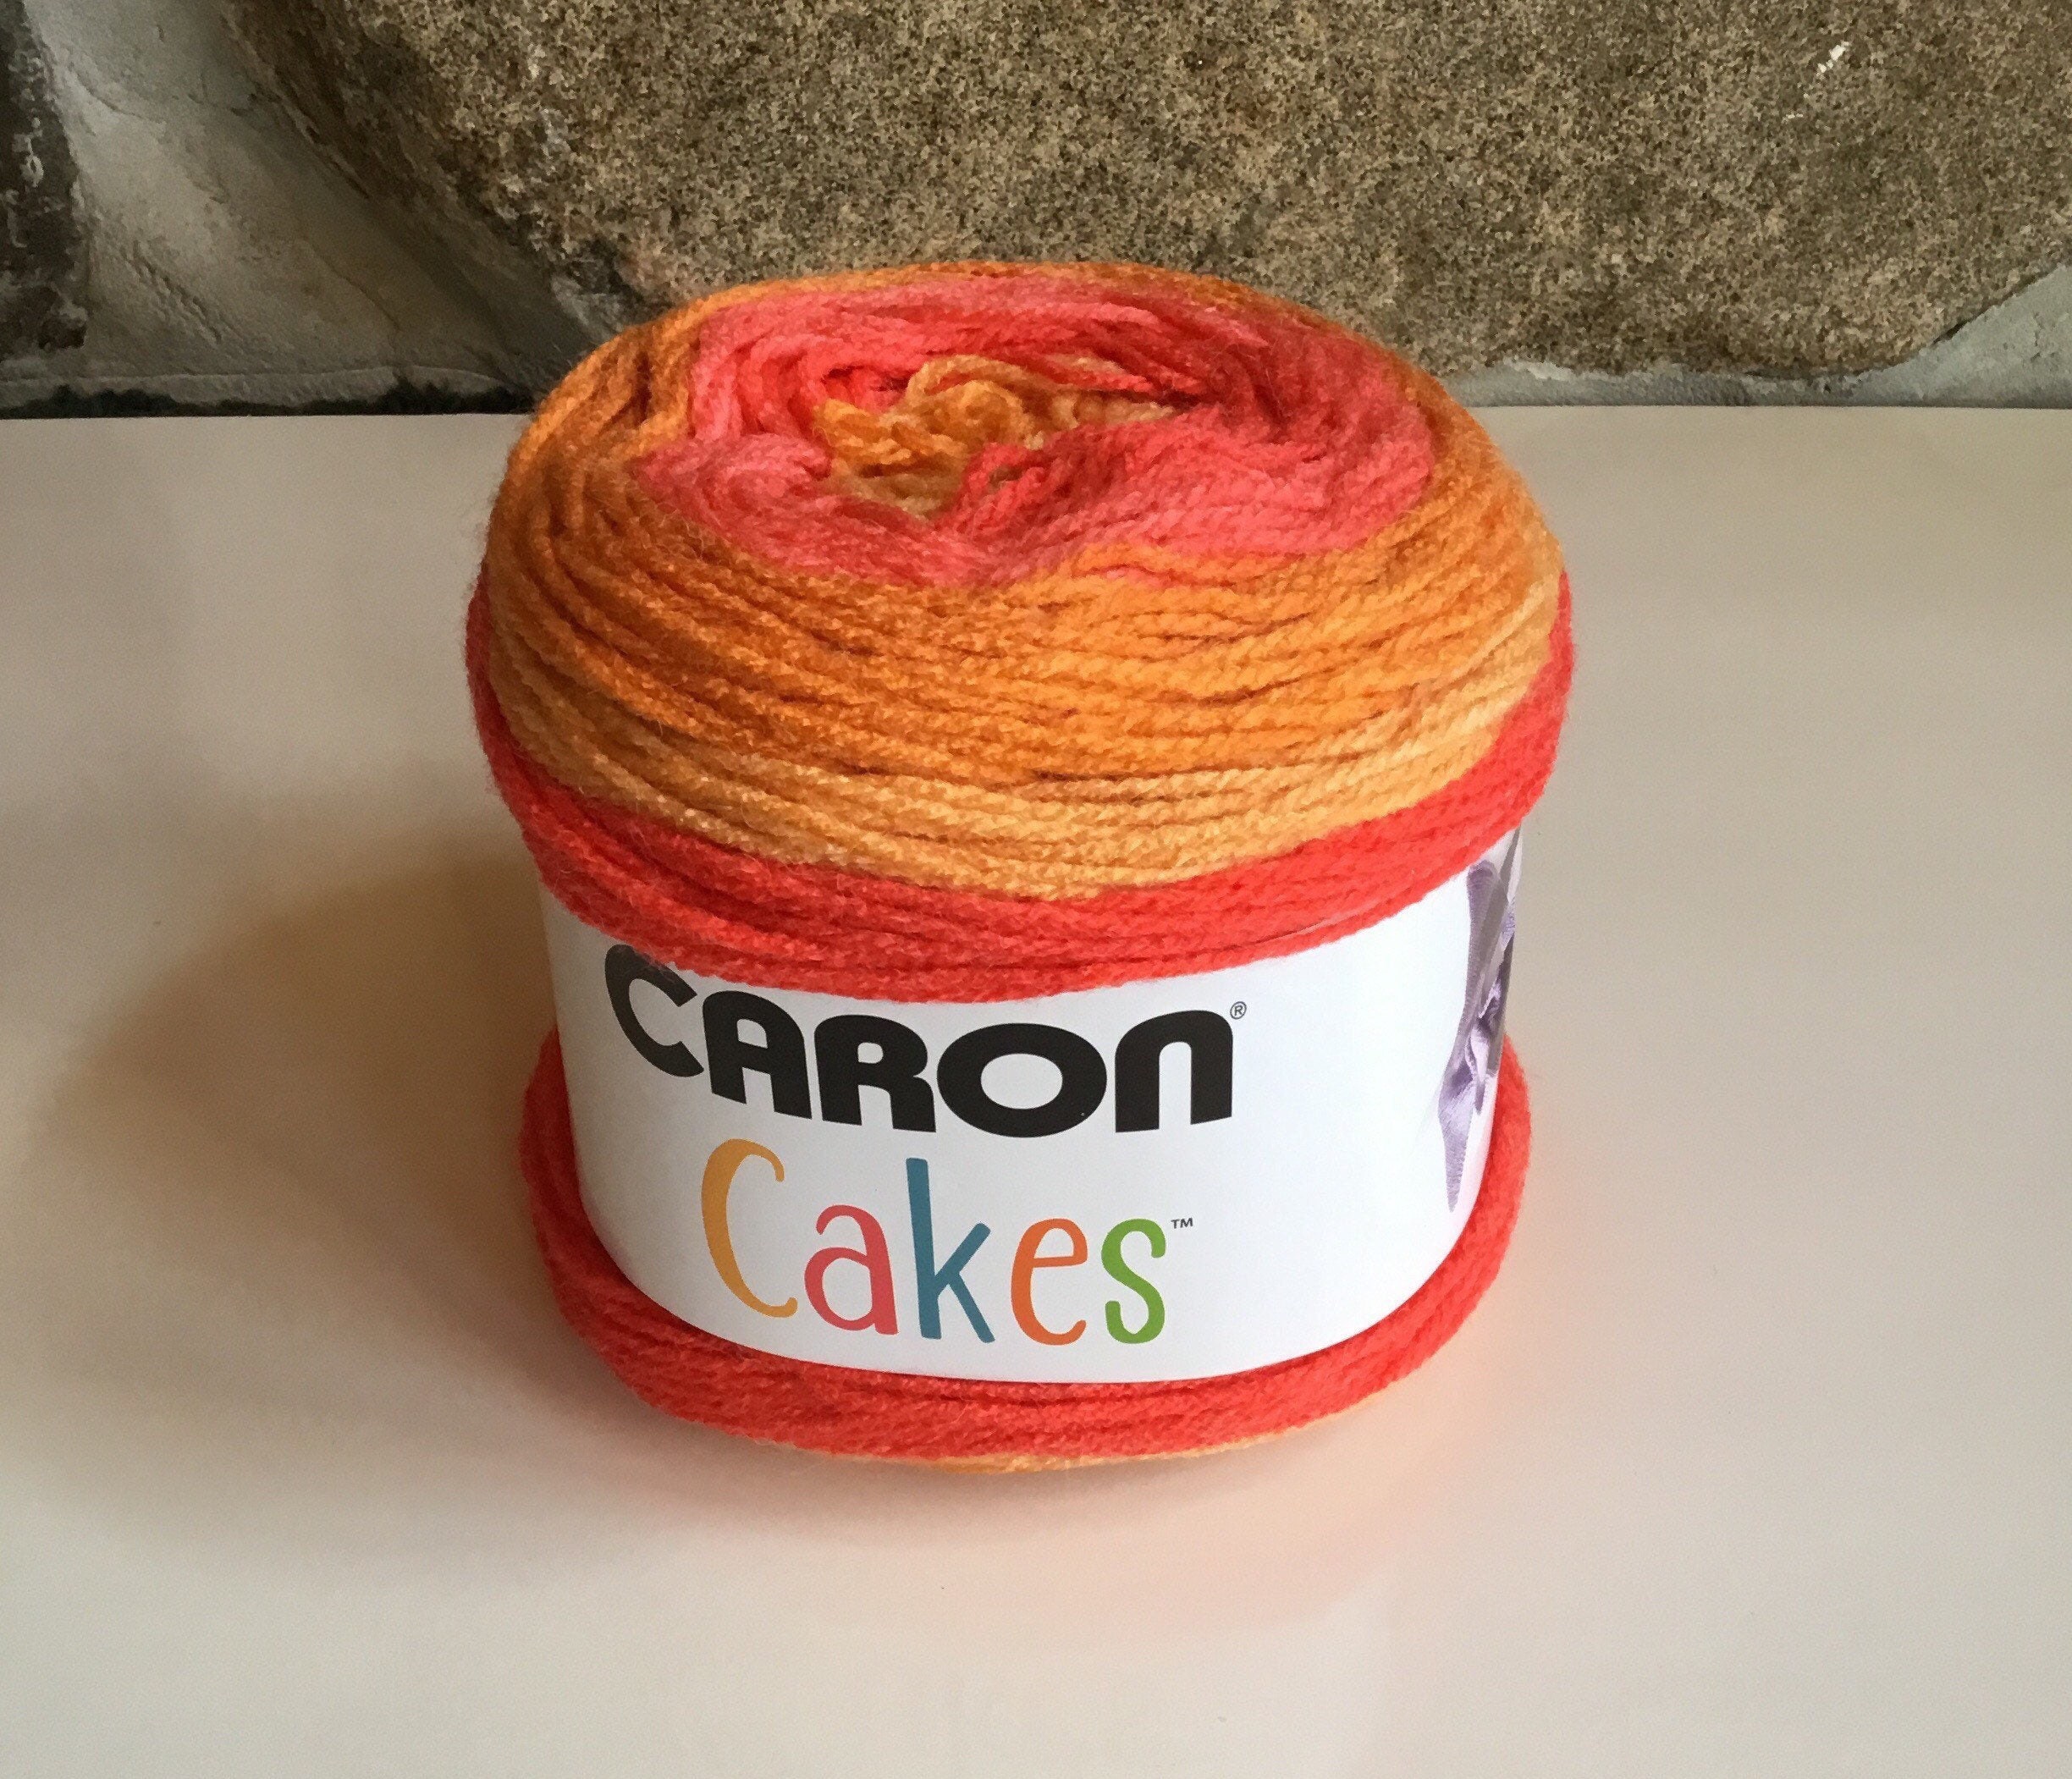 CARON CAKES Yarn 7.1oz 16 Colors to Choose From - Many Discontinued Colors!